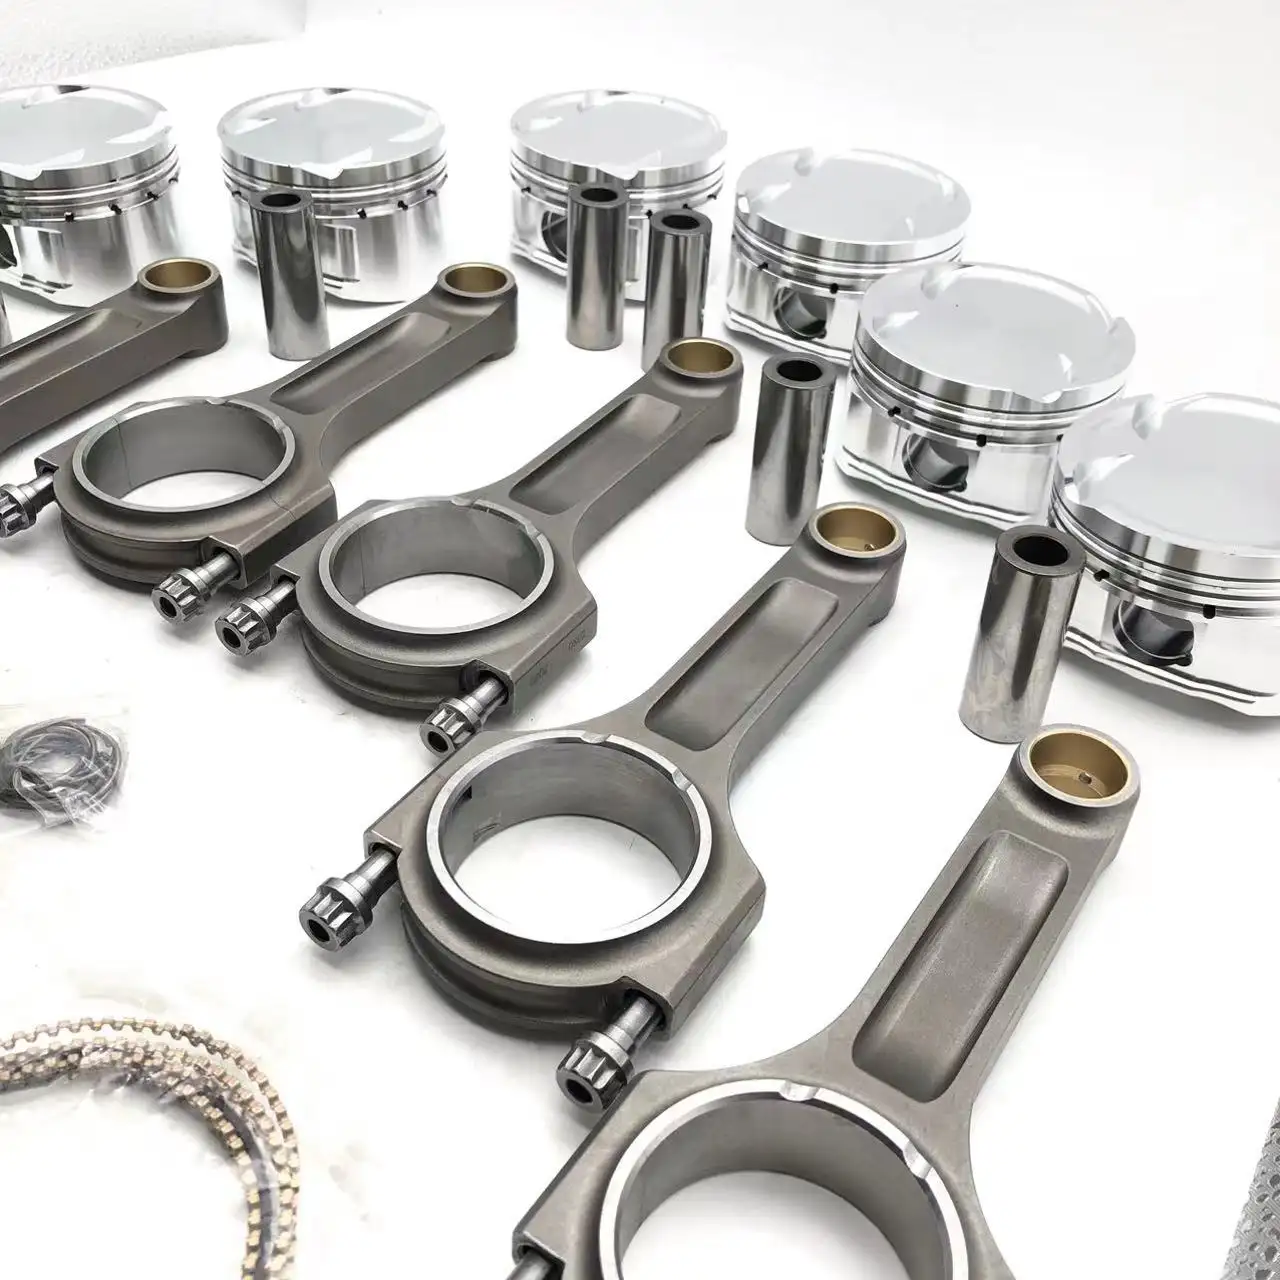 86mm/86.5mm/87mm CR 9.0:1/10:1 2JZ GTE Piston Rod kit Forged Pistons Forged Connecting Rods For Toyota Supra 2JZ GTE